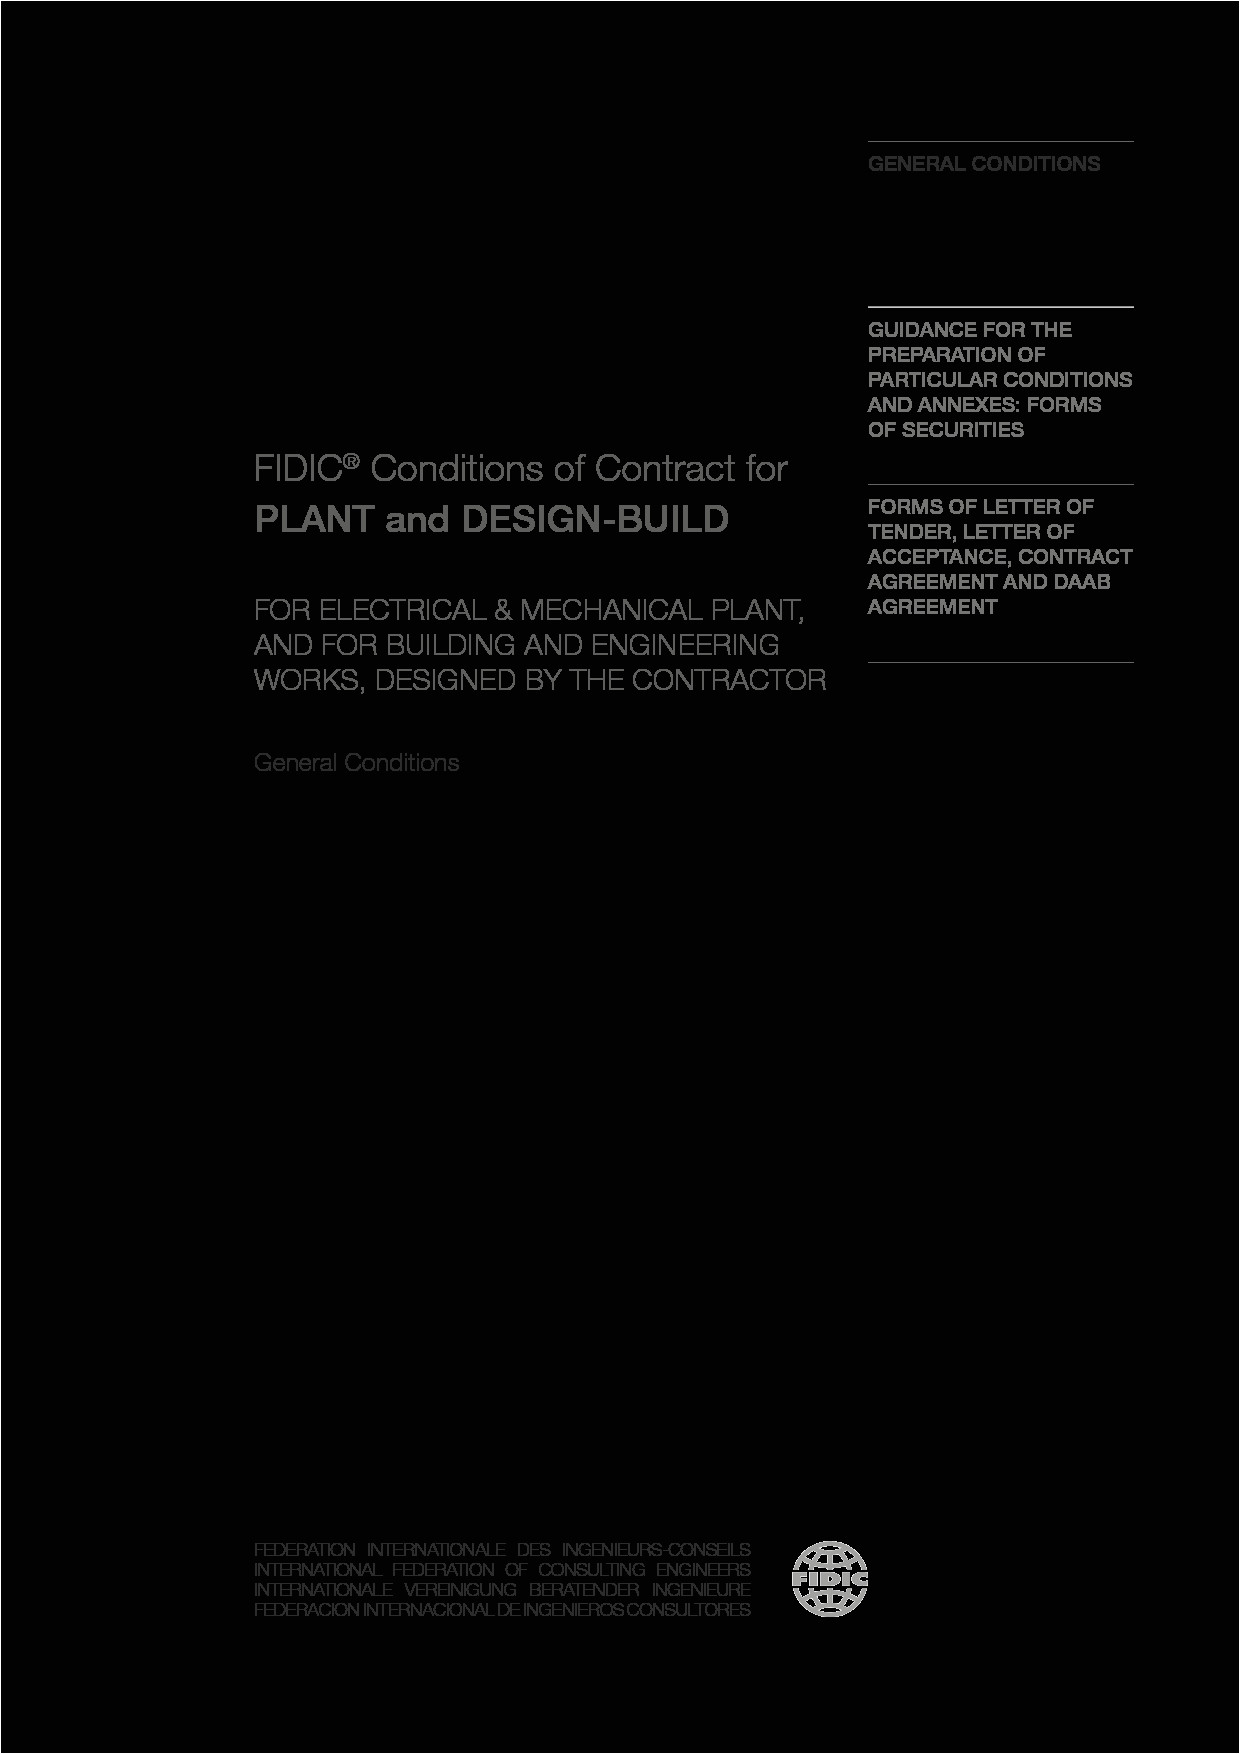 Fidic Yellow Book Contract Template Plant and Design Build Contract 2nd Ed 2017 Yellow Book